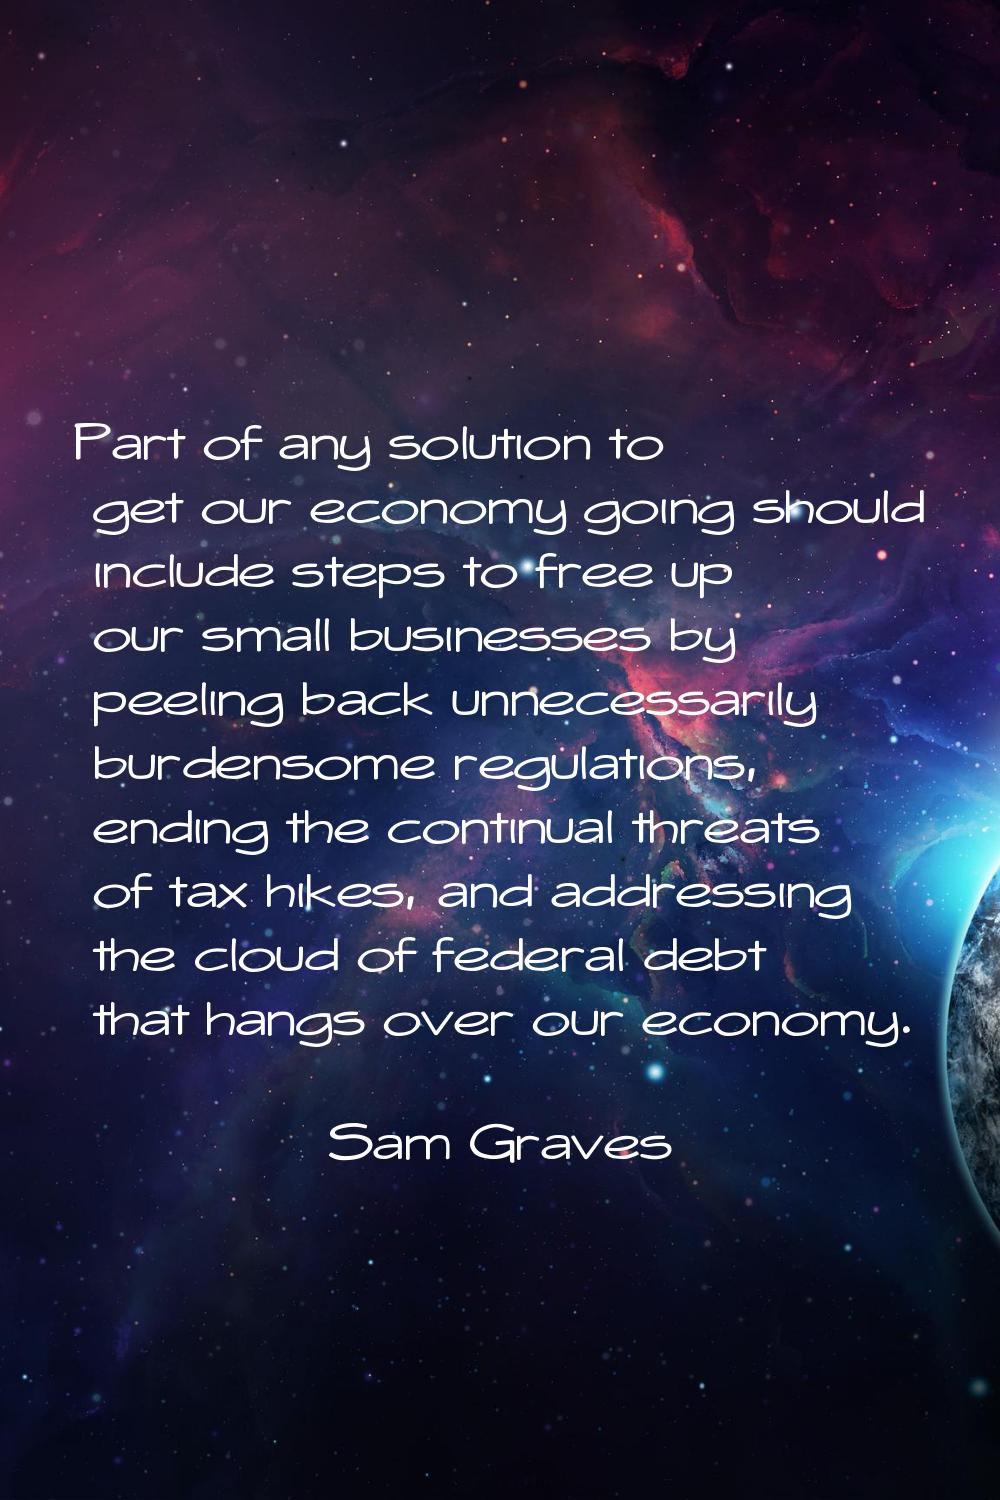 Part of any solution to get our economy going should include steps to free up our small businesses 